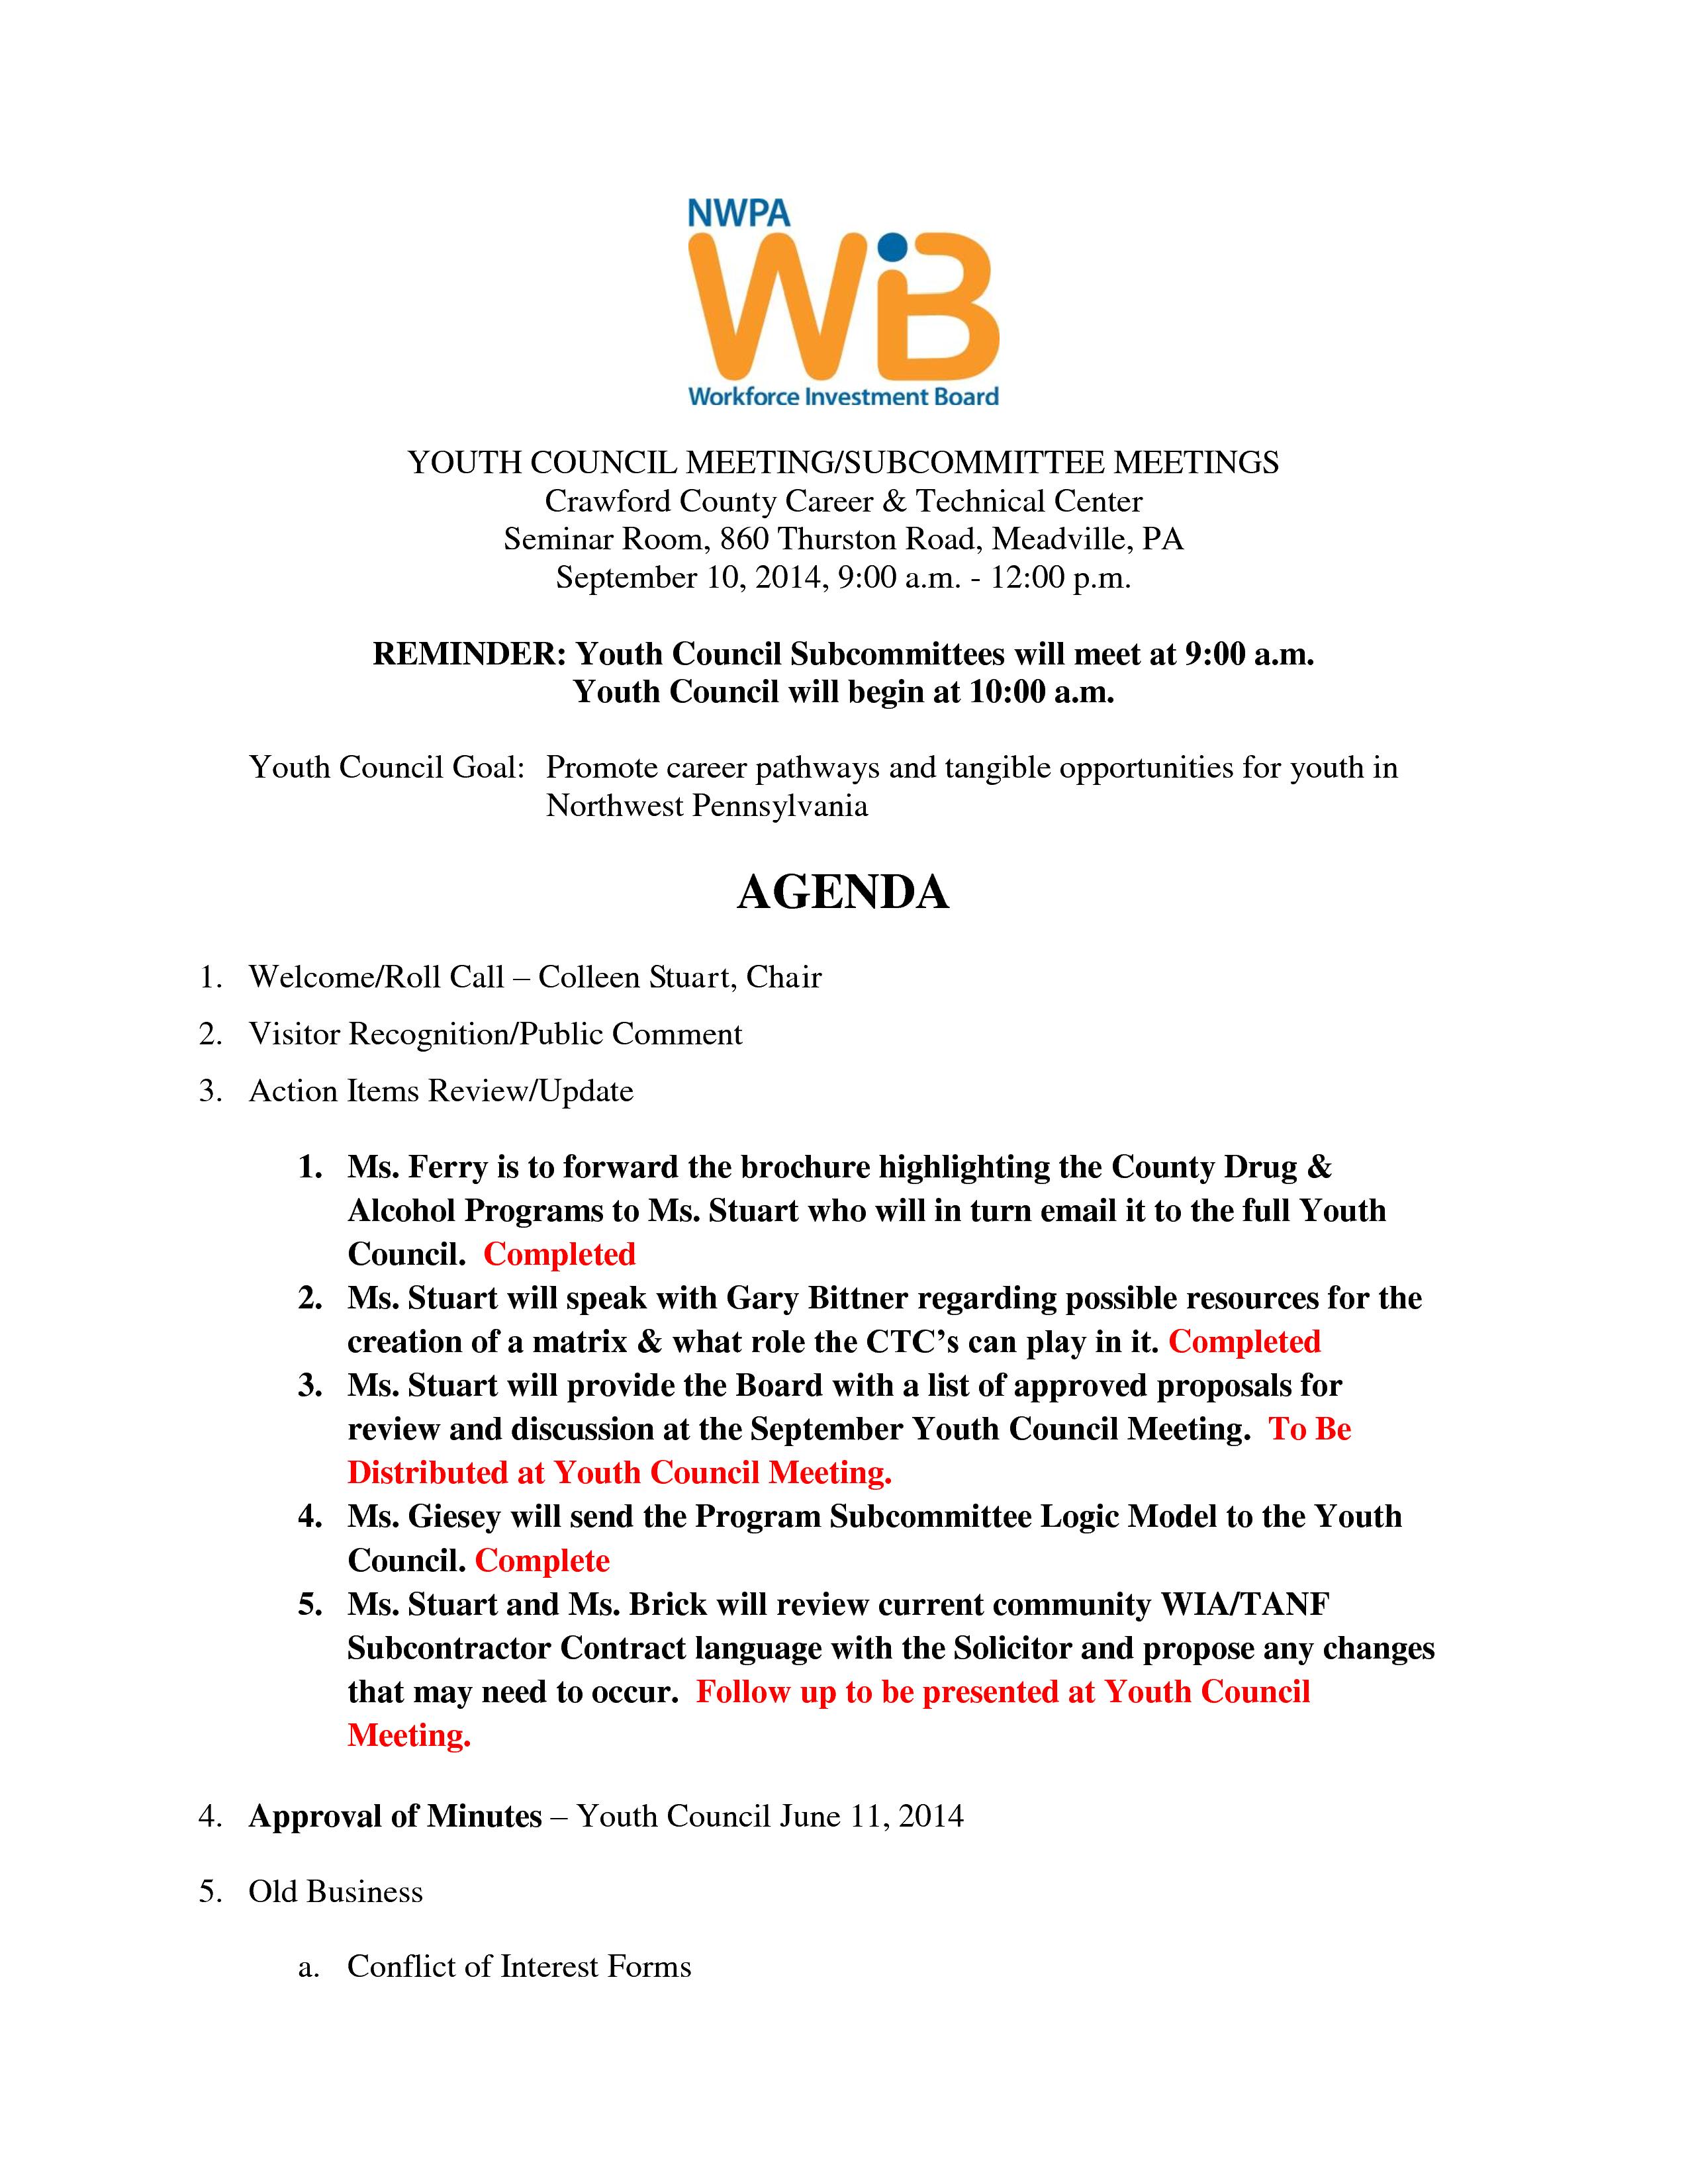 Youth Council Agenda 09-10-14